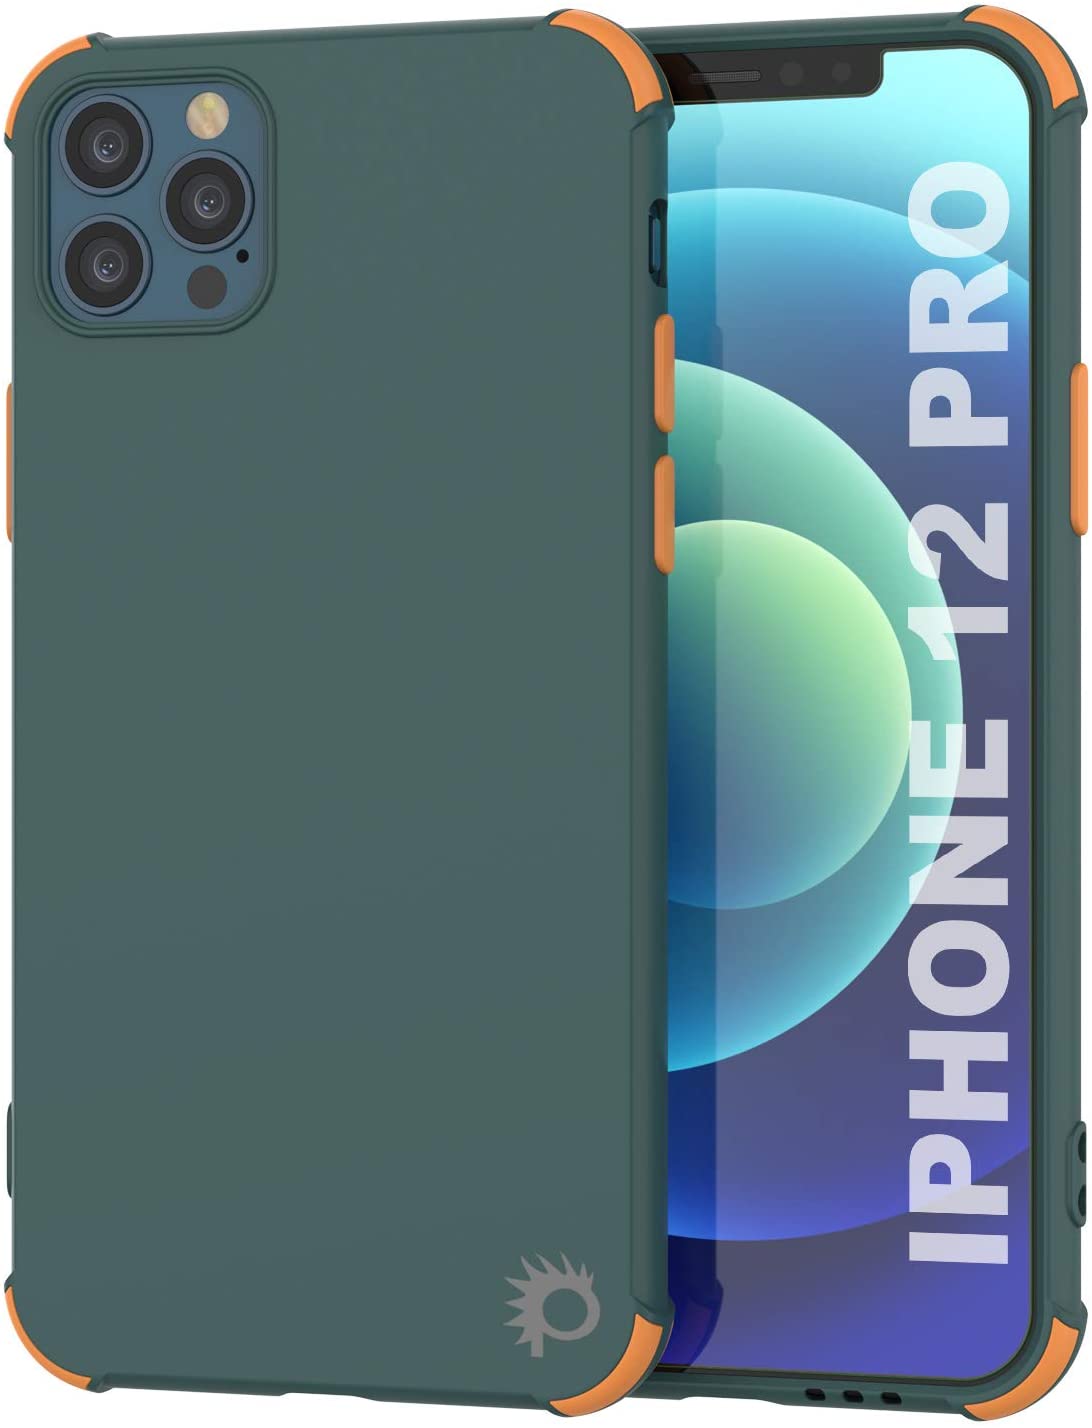 Punkcase Protective & Lightweight TPU Case [Sunshine Series] for iPhone 12 Pro [Dark Green] (Color in image: Dark Green)